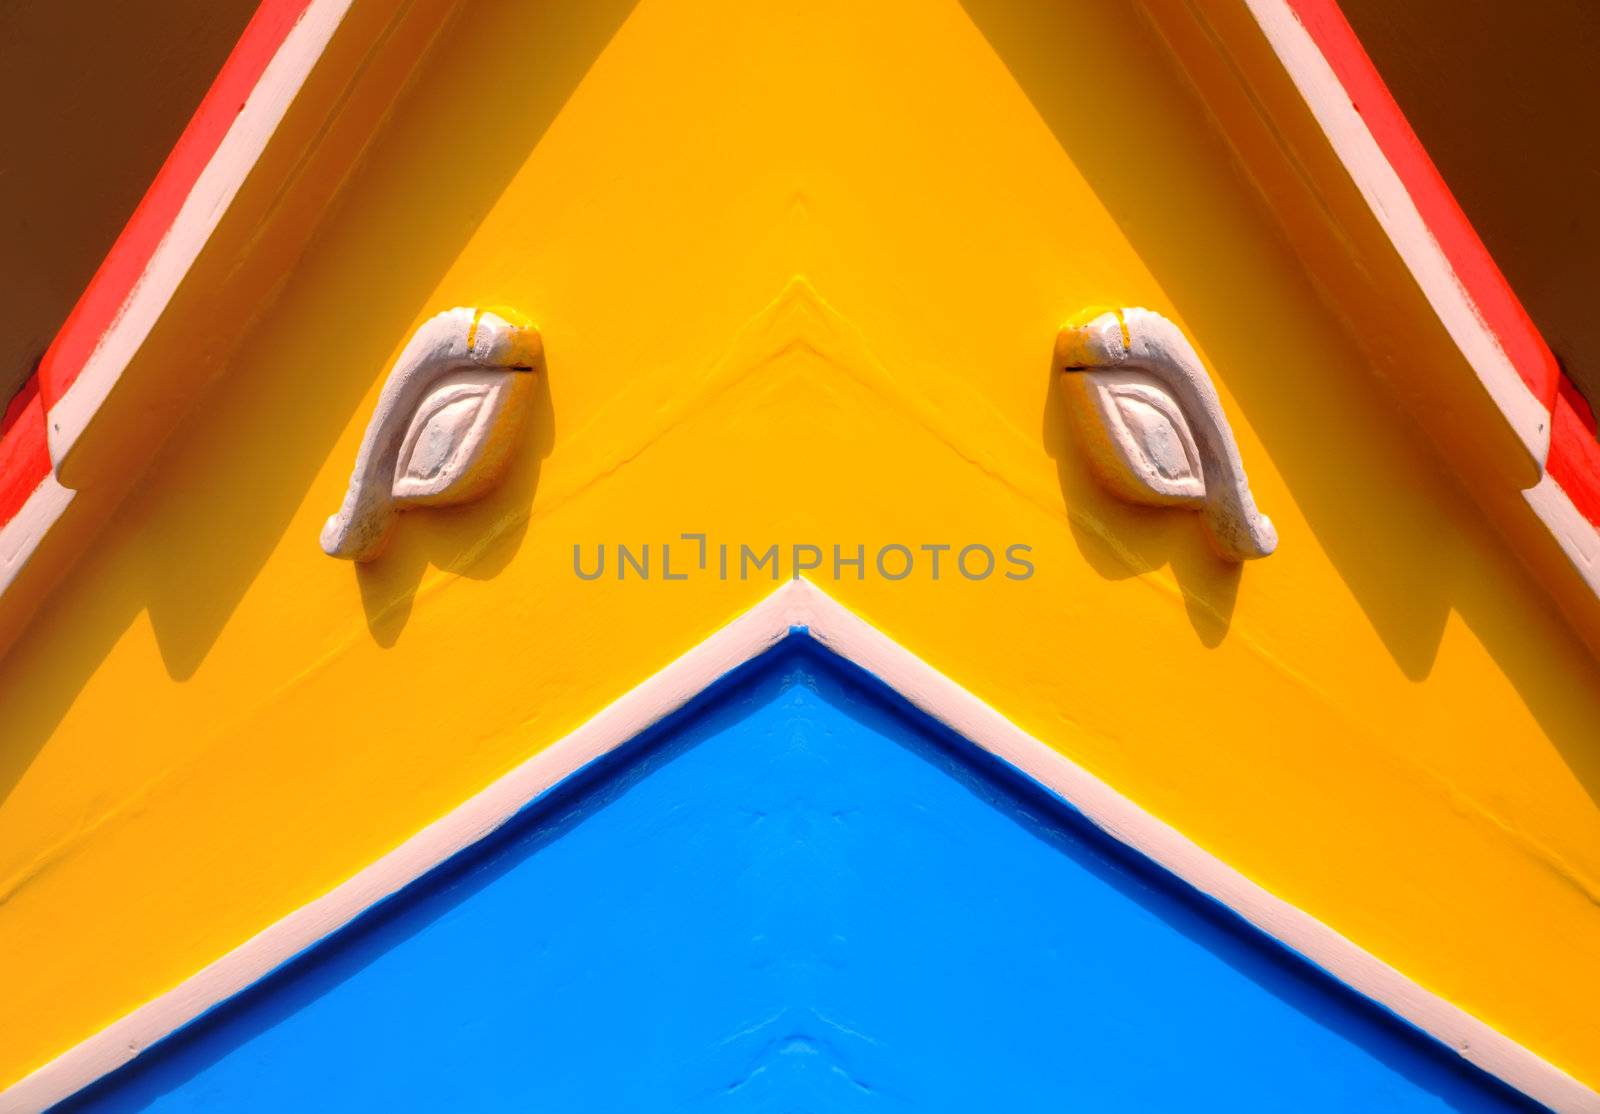 Traditional colors and eyes found on the traditional Malta fishing boats, commonly known as luzzu or dghajsa. The eyes are said to come down from Phoenician and Egyptian times.